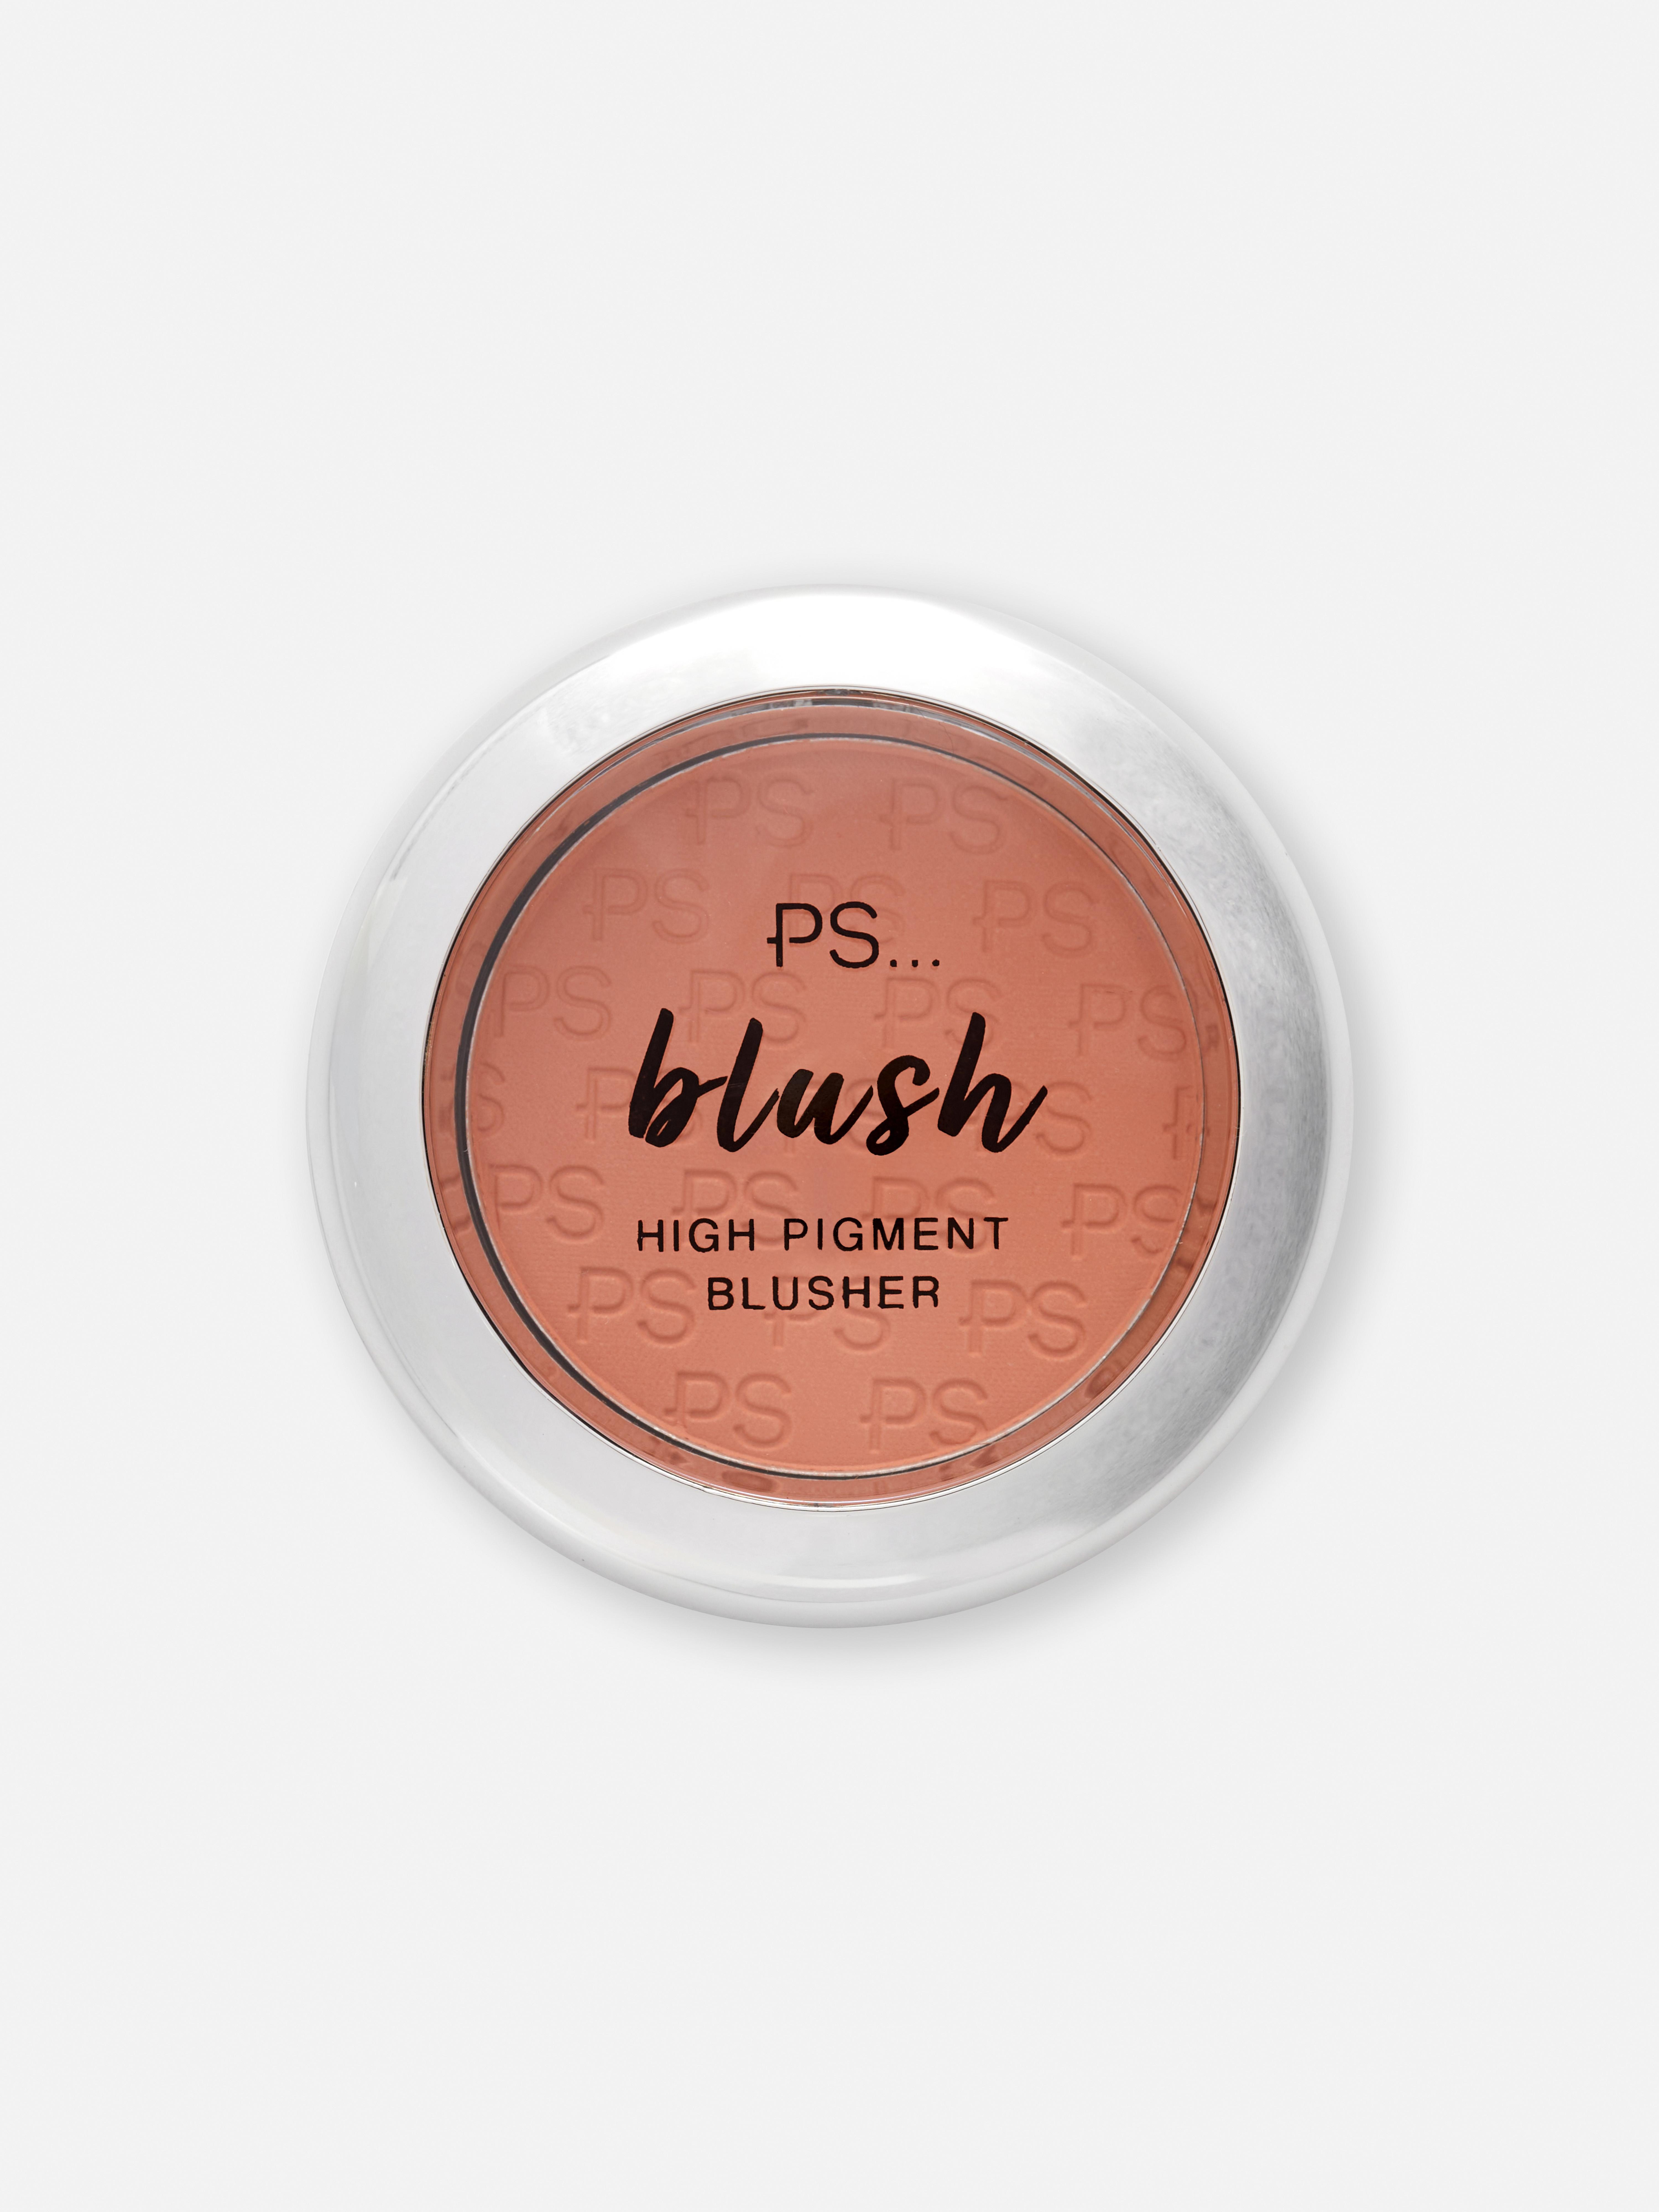 PS... High Pigment Blusher